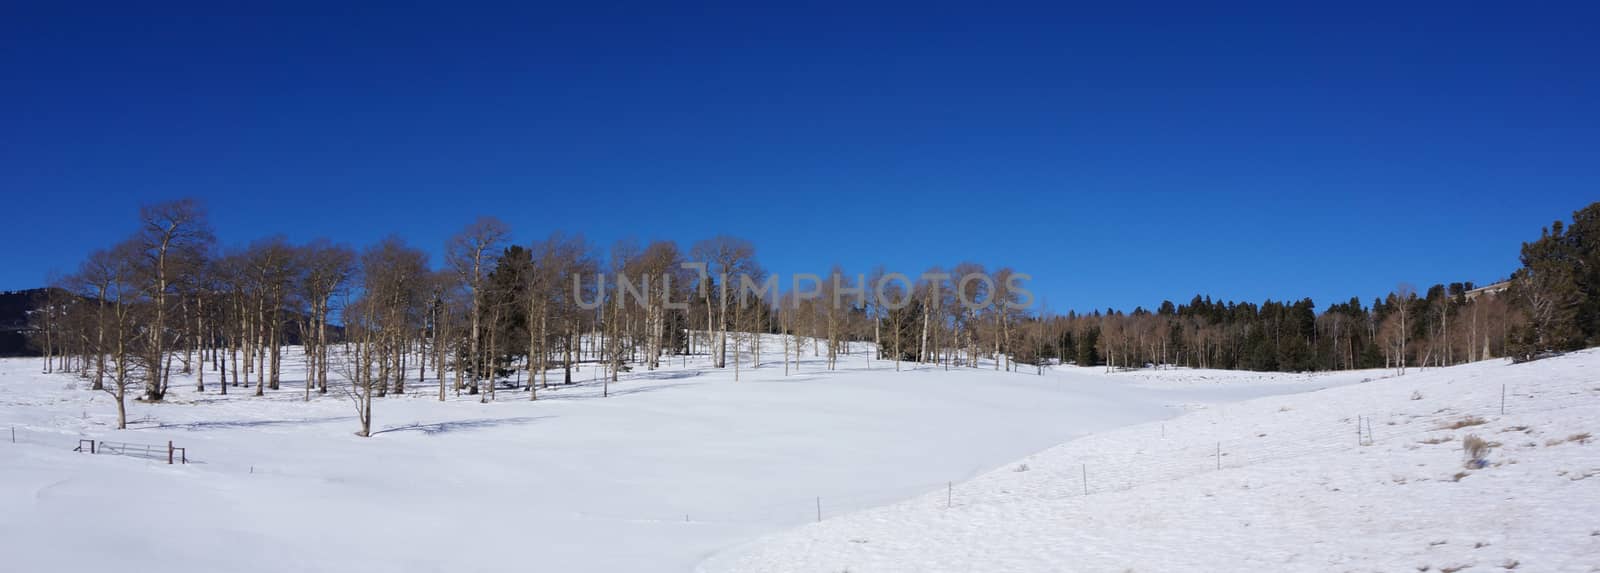 Scenic view of America forest in the winter